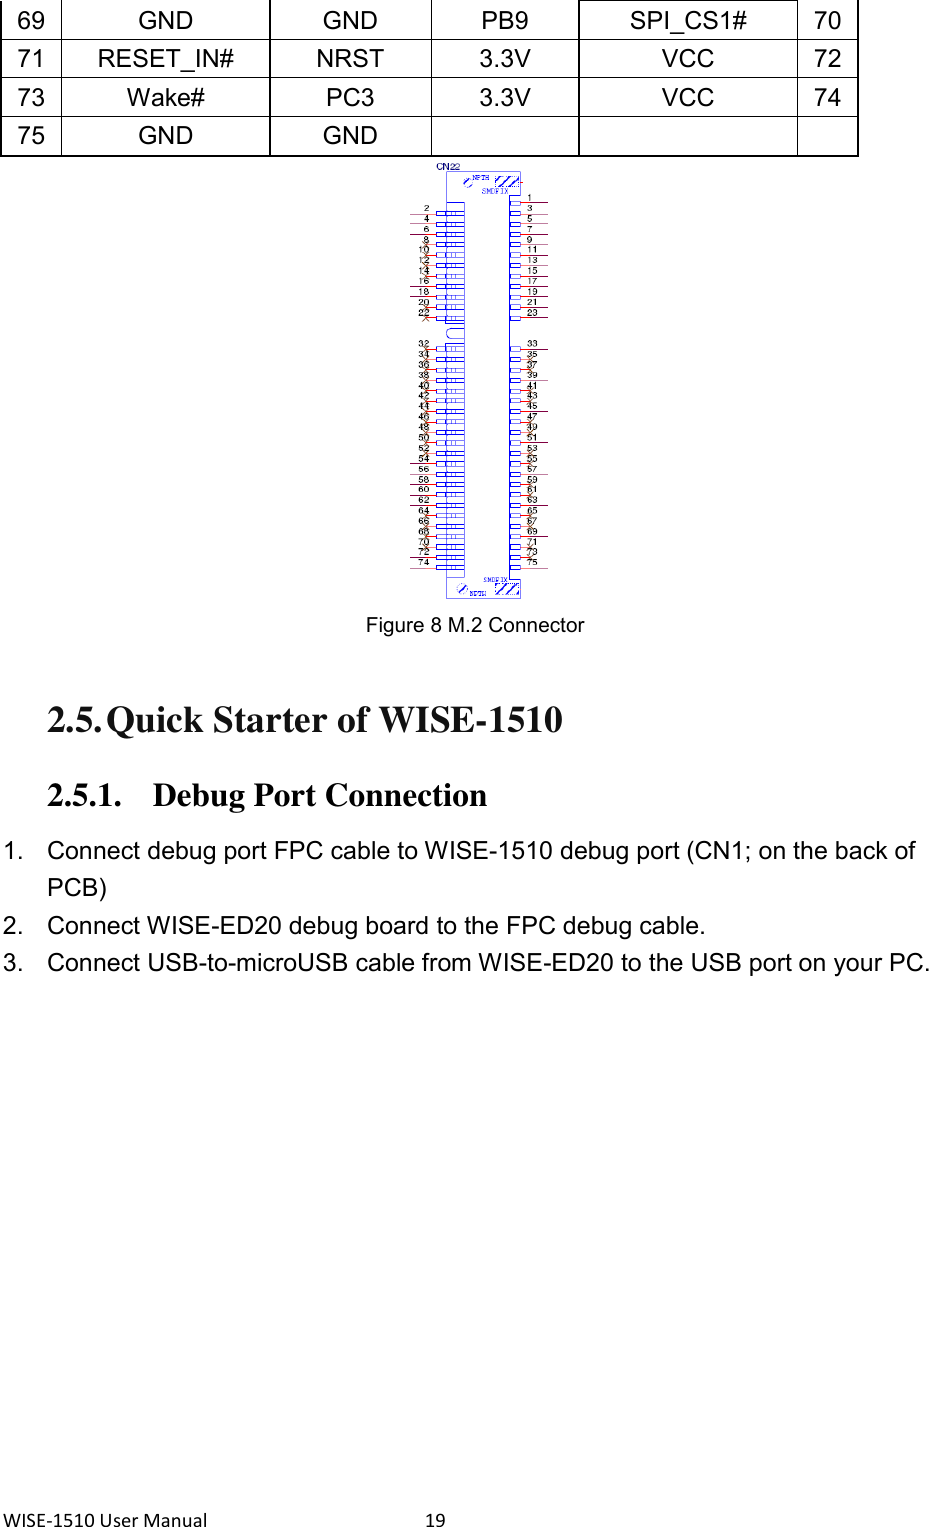 WISE-1510 User Manual  19 69 GND GND PB9 SPI_CS1# 70 71 RESET_IN#   NRST 3.3V VCC 72 73 Wake#   PC3 3.3V VCC 74 75 GND GND        Figure 8 M.2 Connector  2.5. Quick Starter of WISE-1510 2.5.1. Debug Port Connection   1.  Connect debug port FPC cable to WISE-1510 debug port (CN1; on the back of PCB) 2.  Connect WISE-ED20 debug board to the FPC debug cable. 3.  Connect USB-to-microUSB cable from WISE-ED20 to the USB port on your PC. 